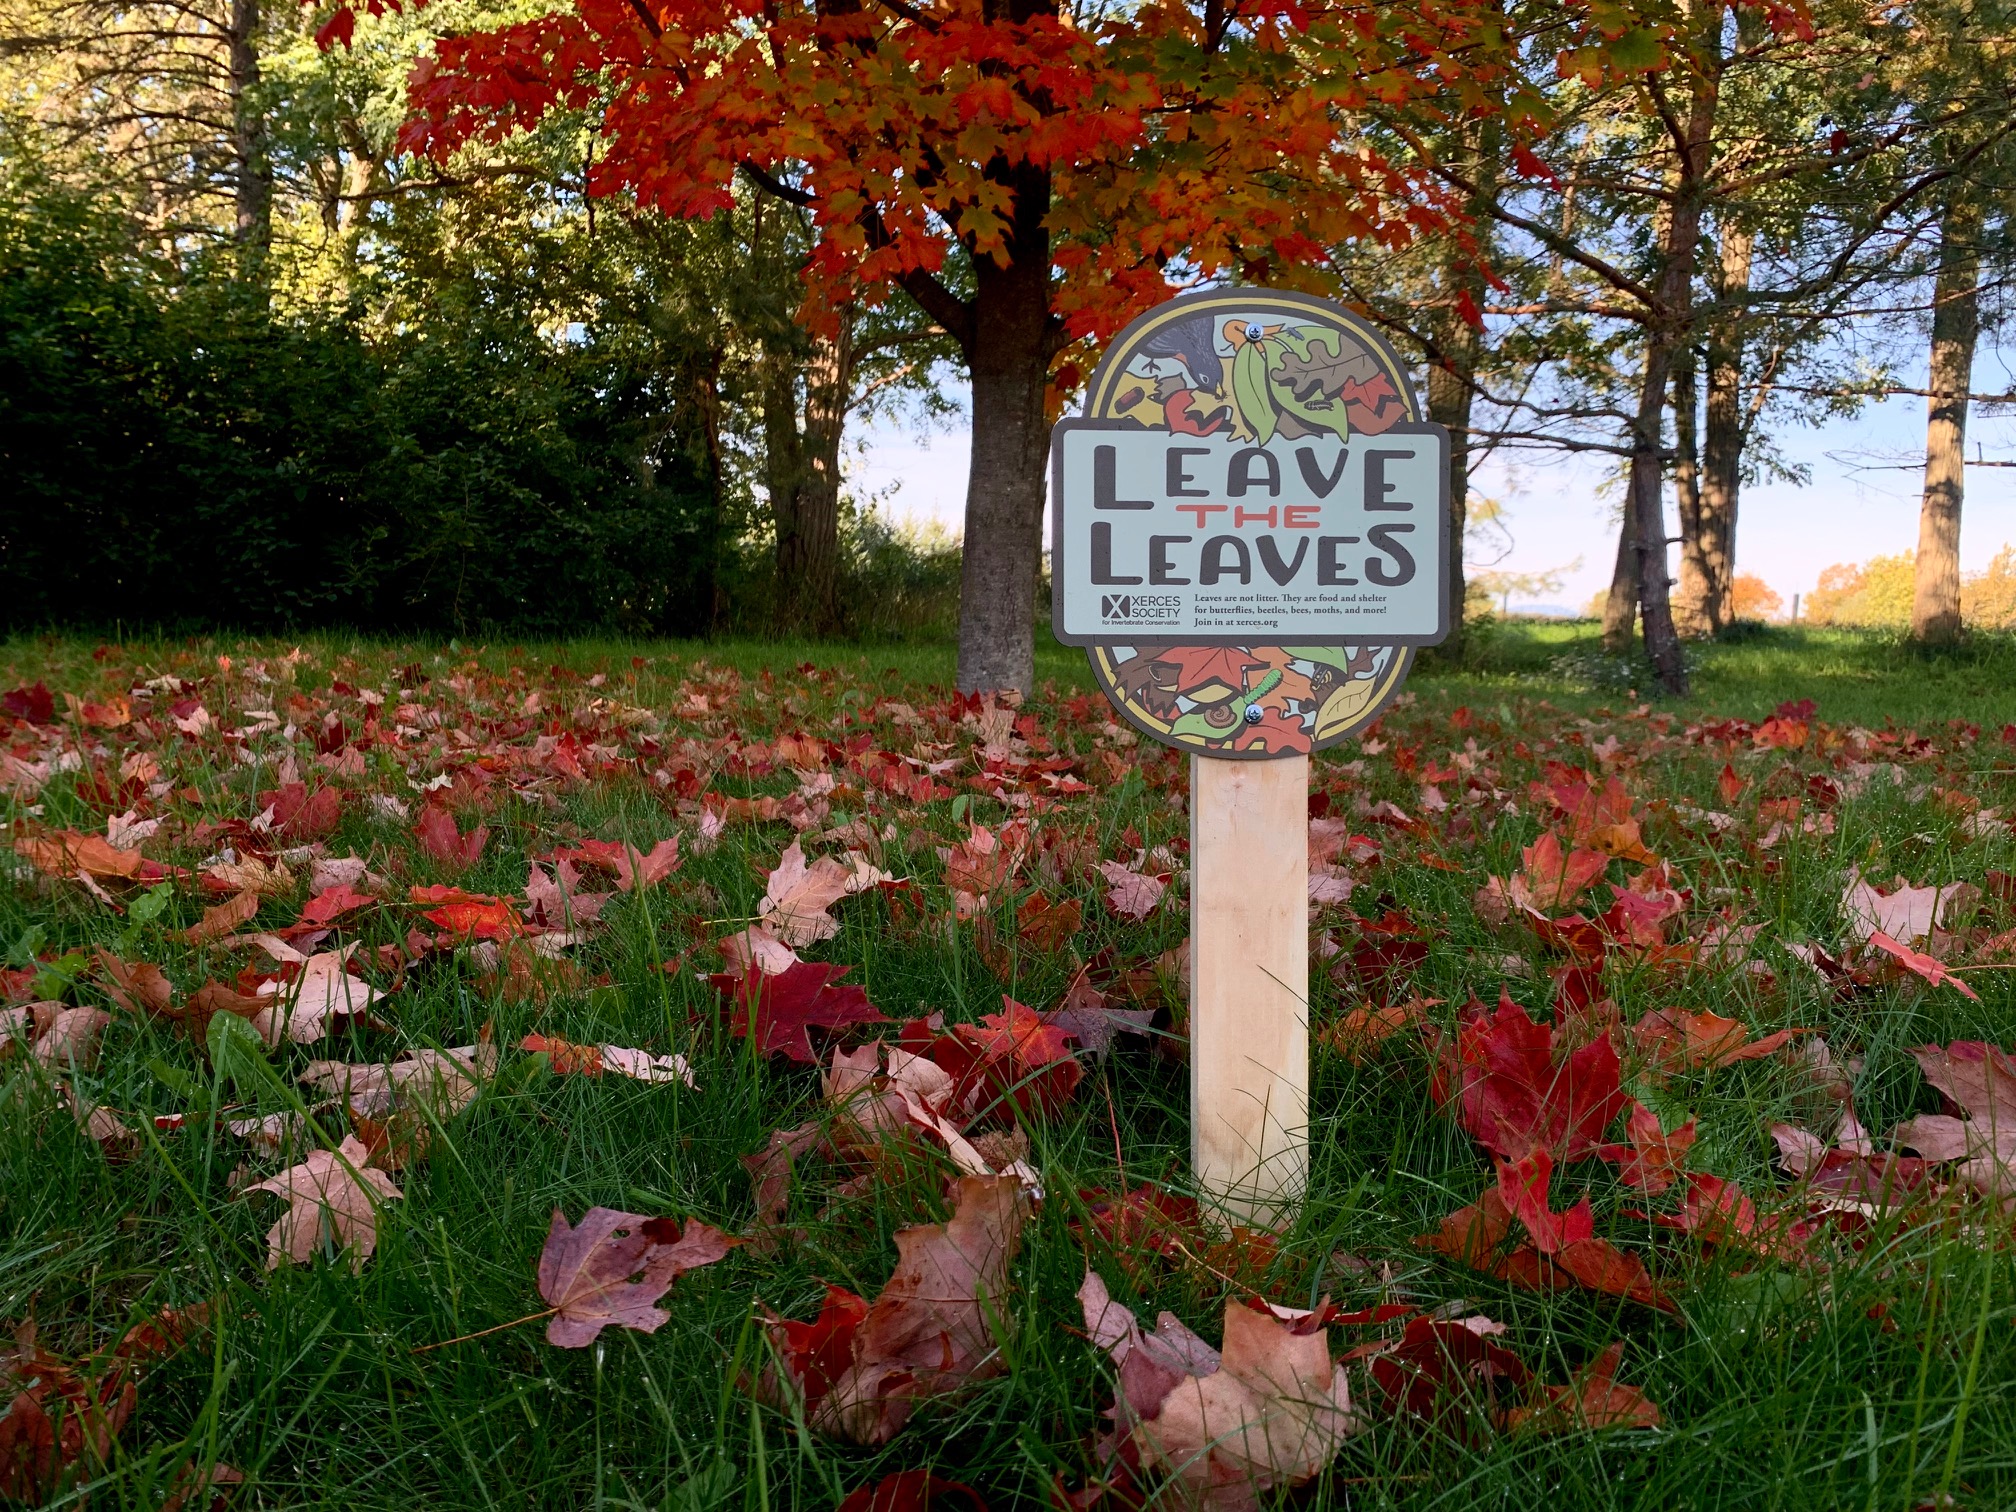 A yard sign saying "Leave the Leaves is staked in a green lawn with red leaves in the grass. A red-leaved tree is in the background.